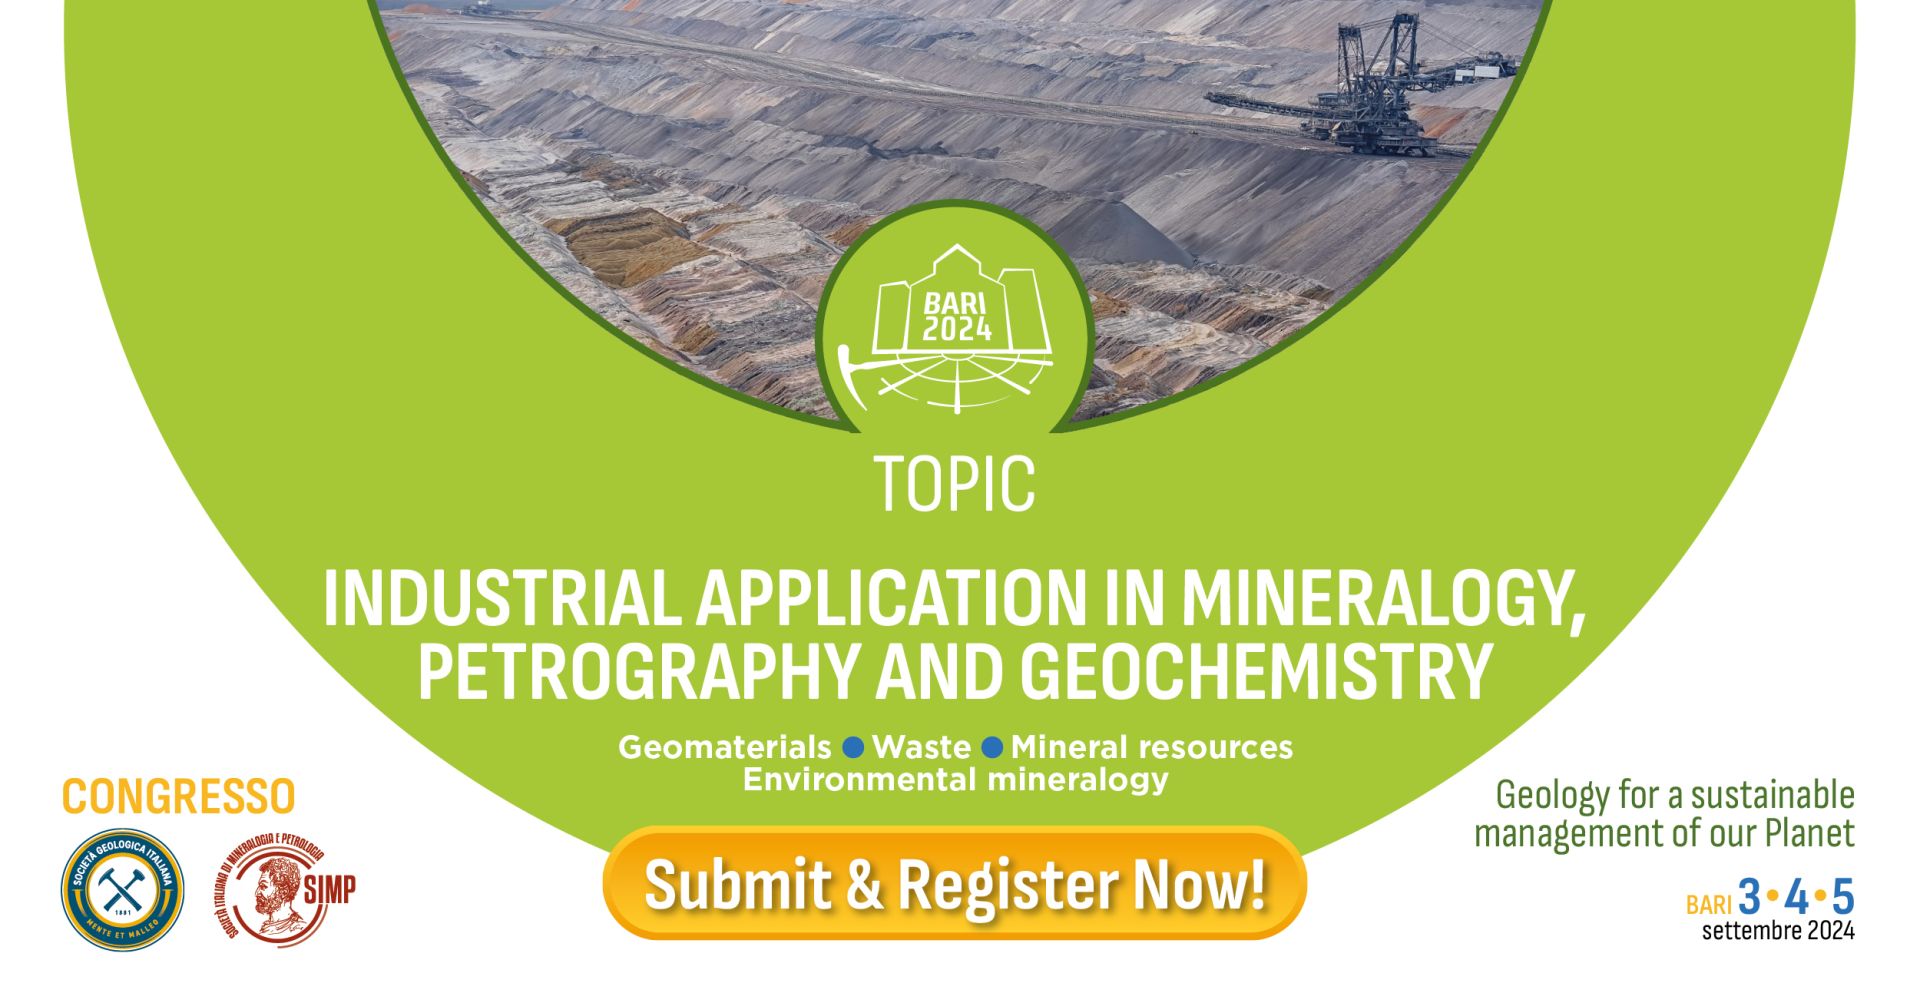 Industrial Application in Mineralogy, Petrography and Geochemistry